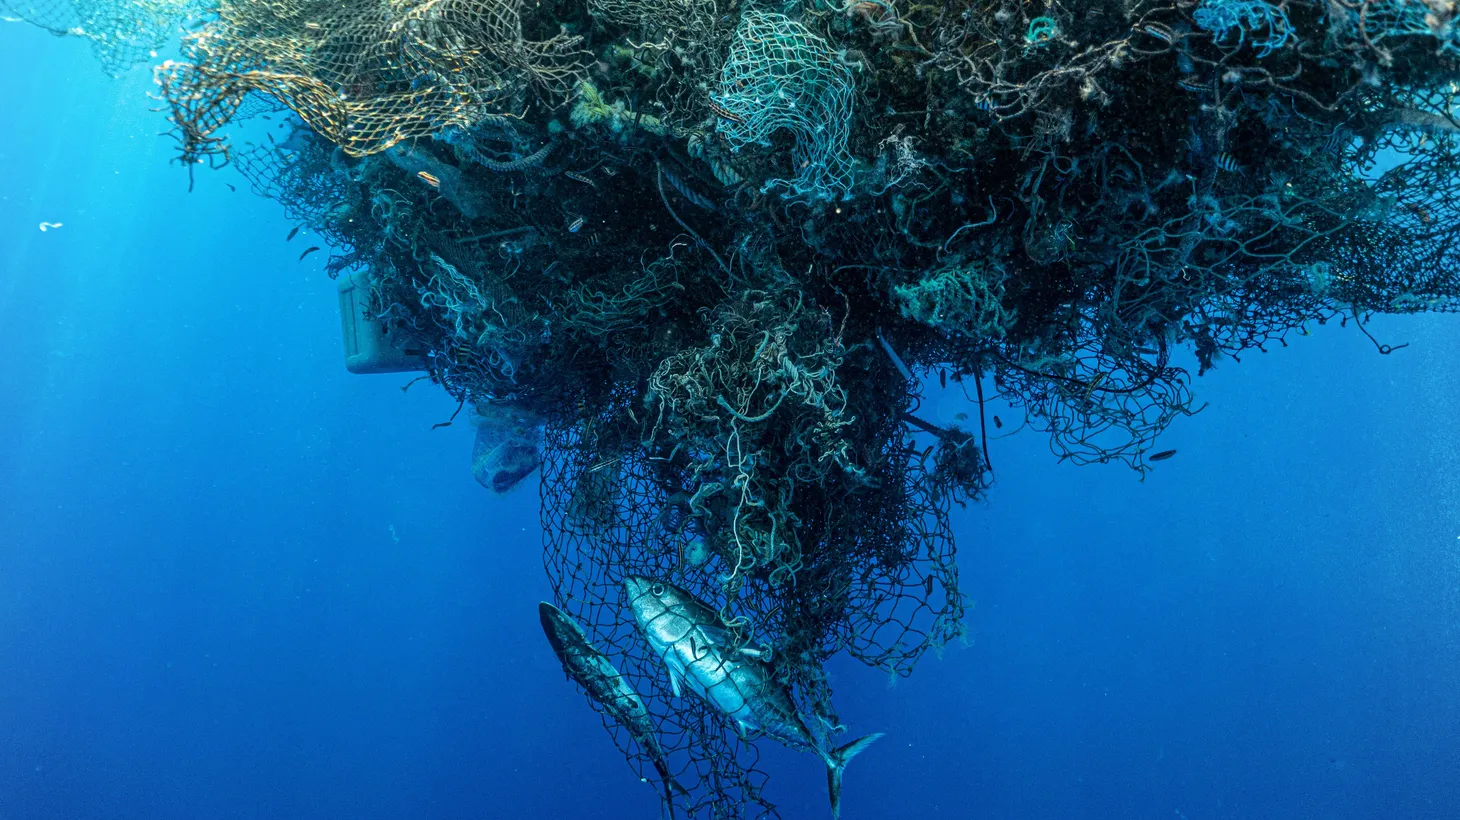 Over the course of 48 days, an expedition to the Great Pacific Garbage Patch managed to haul an astonishing 103 tons of plastic from the ocean.